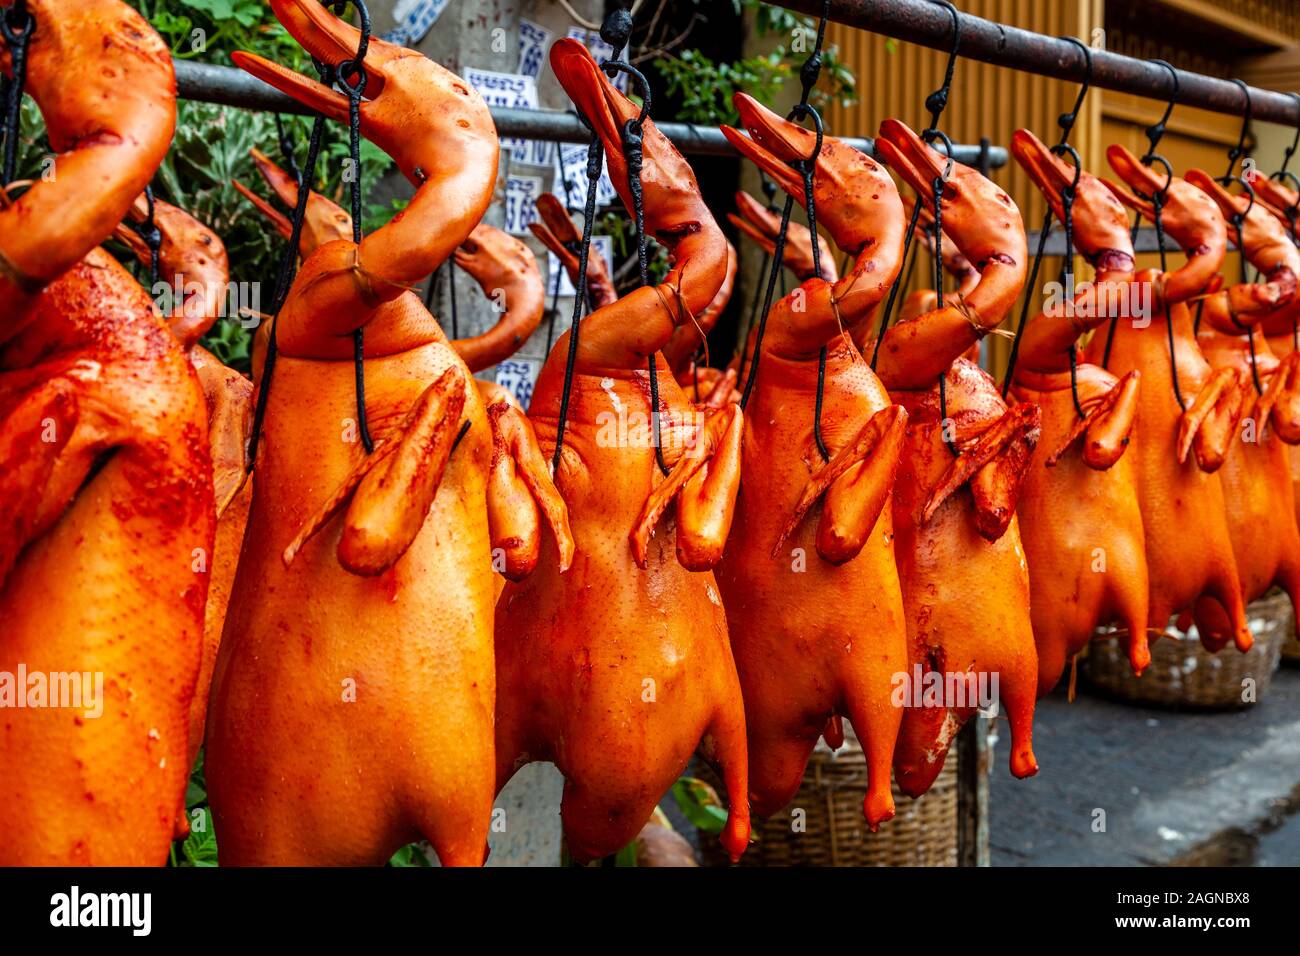 Cooked Ducks Hanging From A Rack In The Street, Phnom Penh, Cambodia. Stock Photo